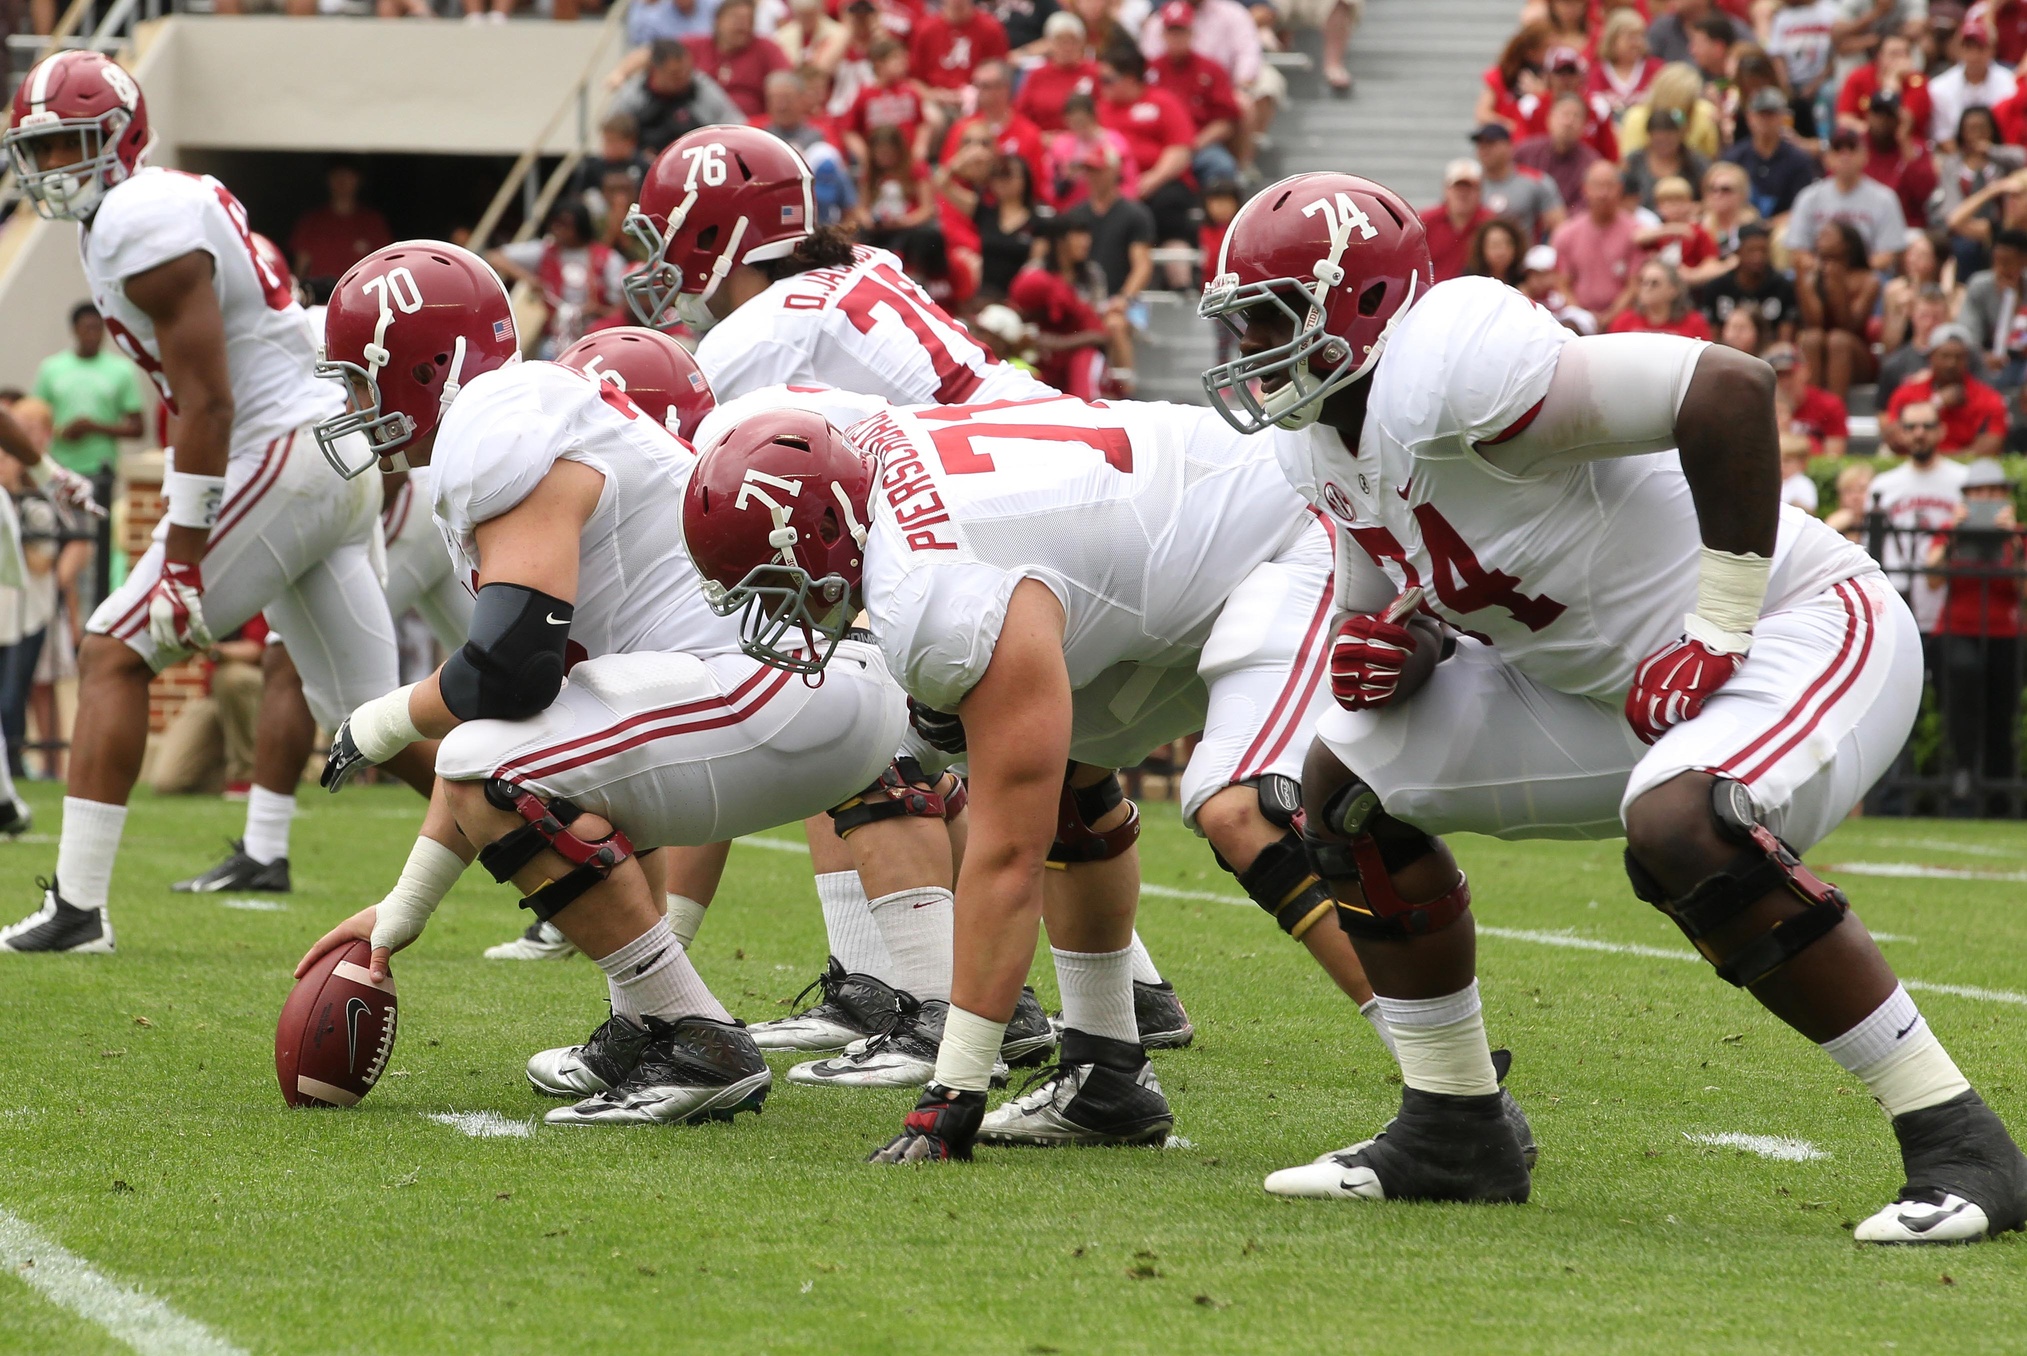 Apr 18, 2015; Tuscaloosa, AL, USA; Alabama Crimson Tide offensive line during the A-day game at Bryant Denny Stadium. Mandatory Credit: Marvin Gentry-USA TODAY Sports